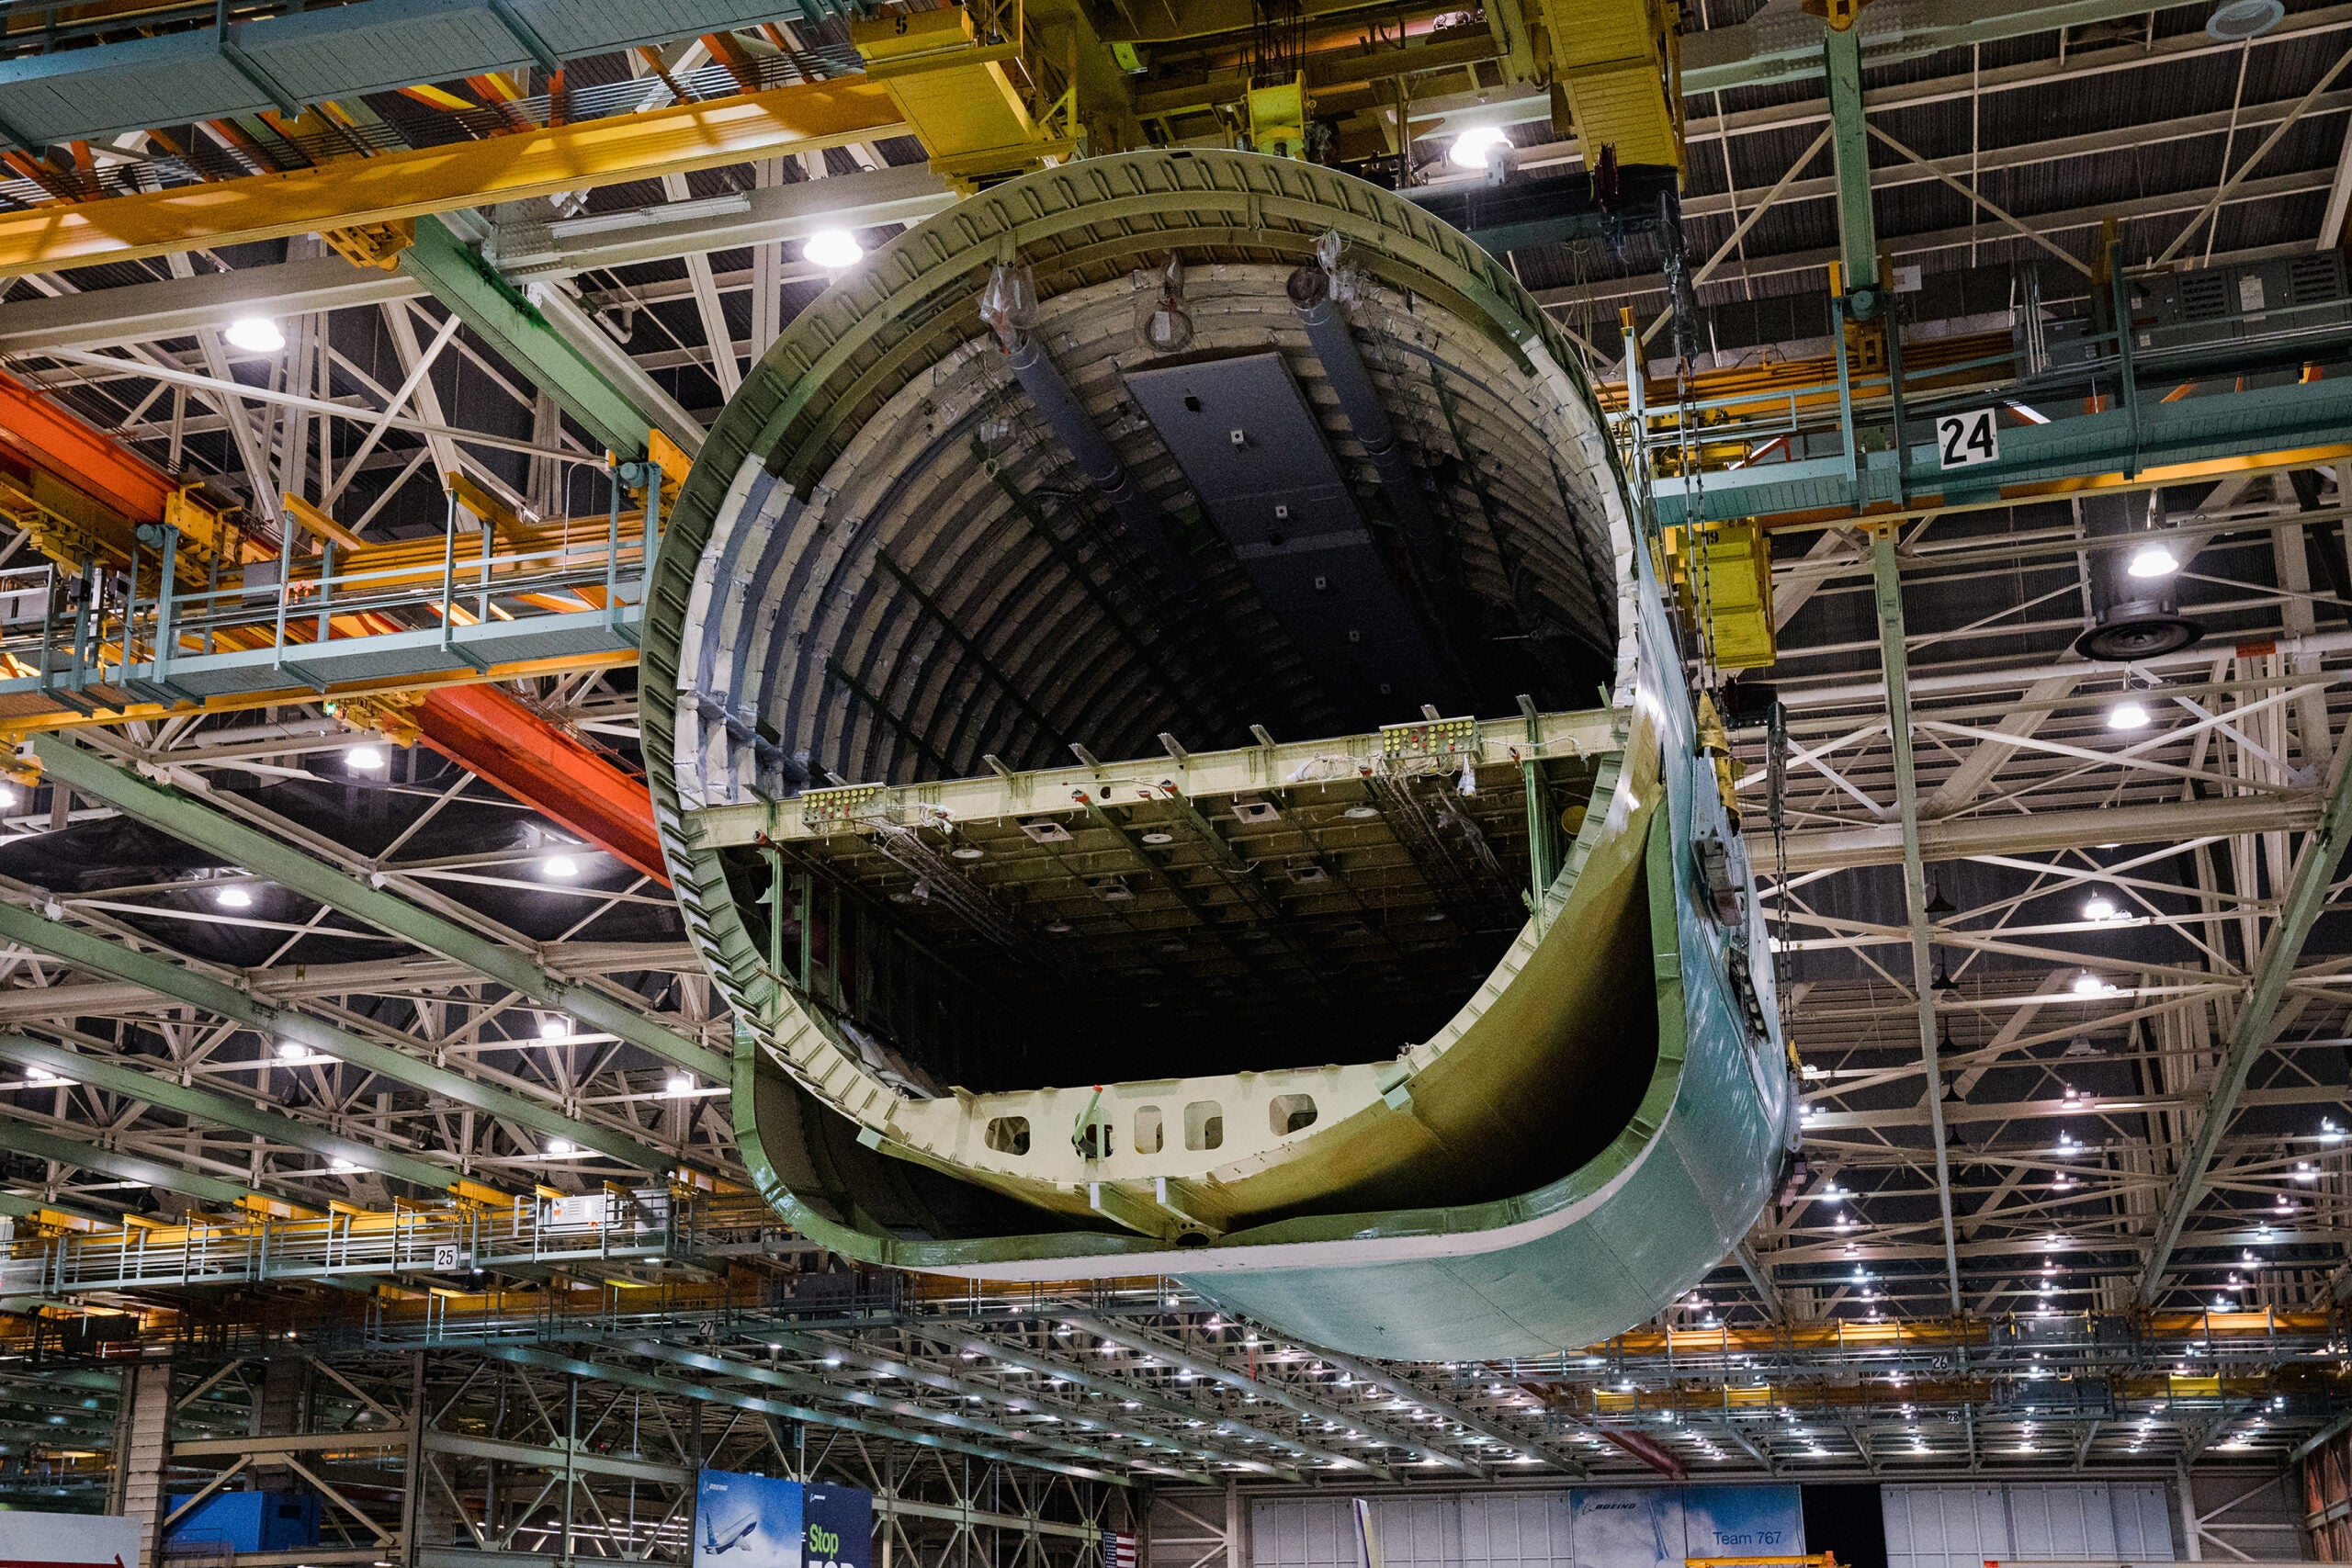 Cranes lift the rear fuselage during the final body join.